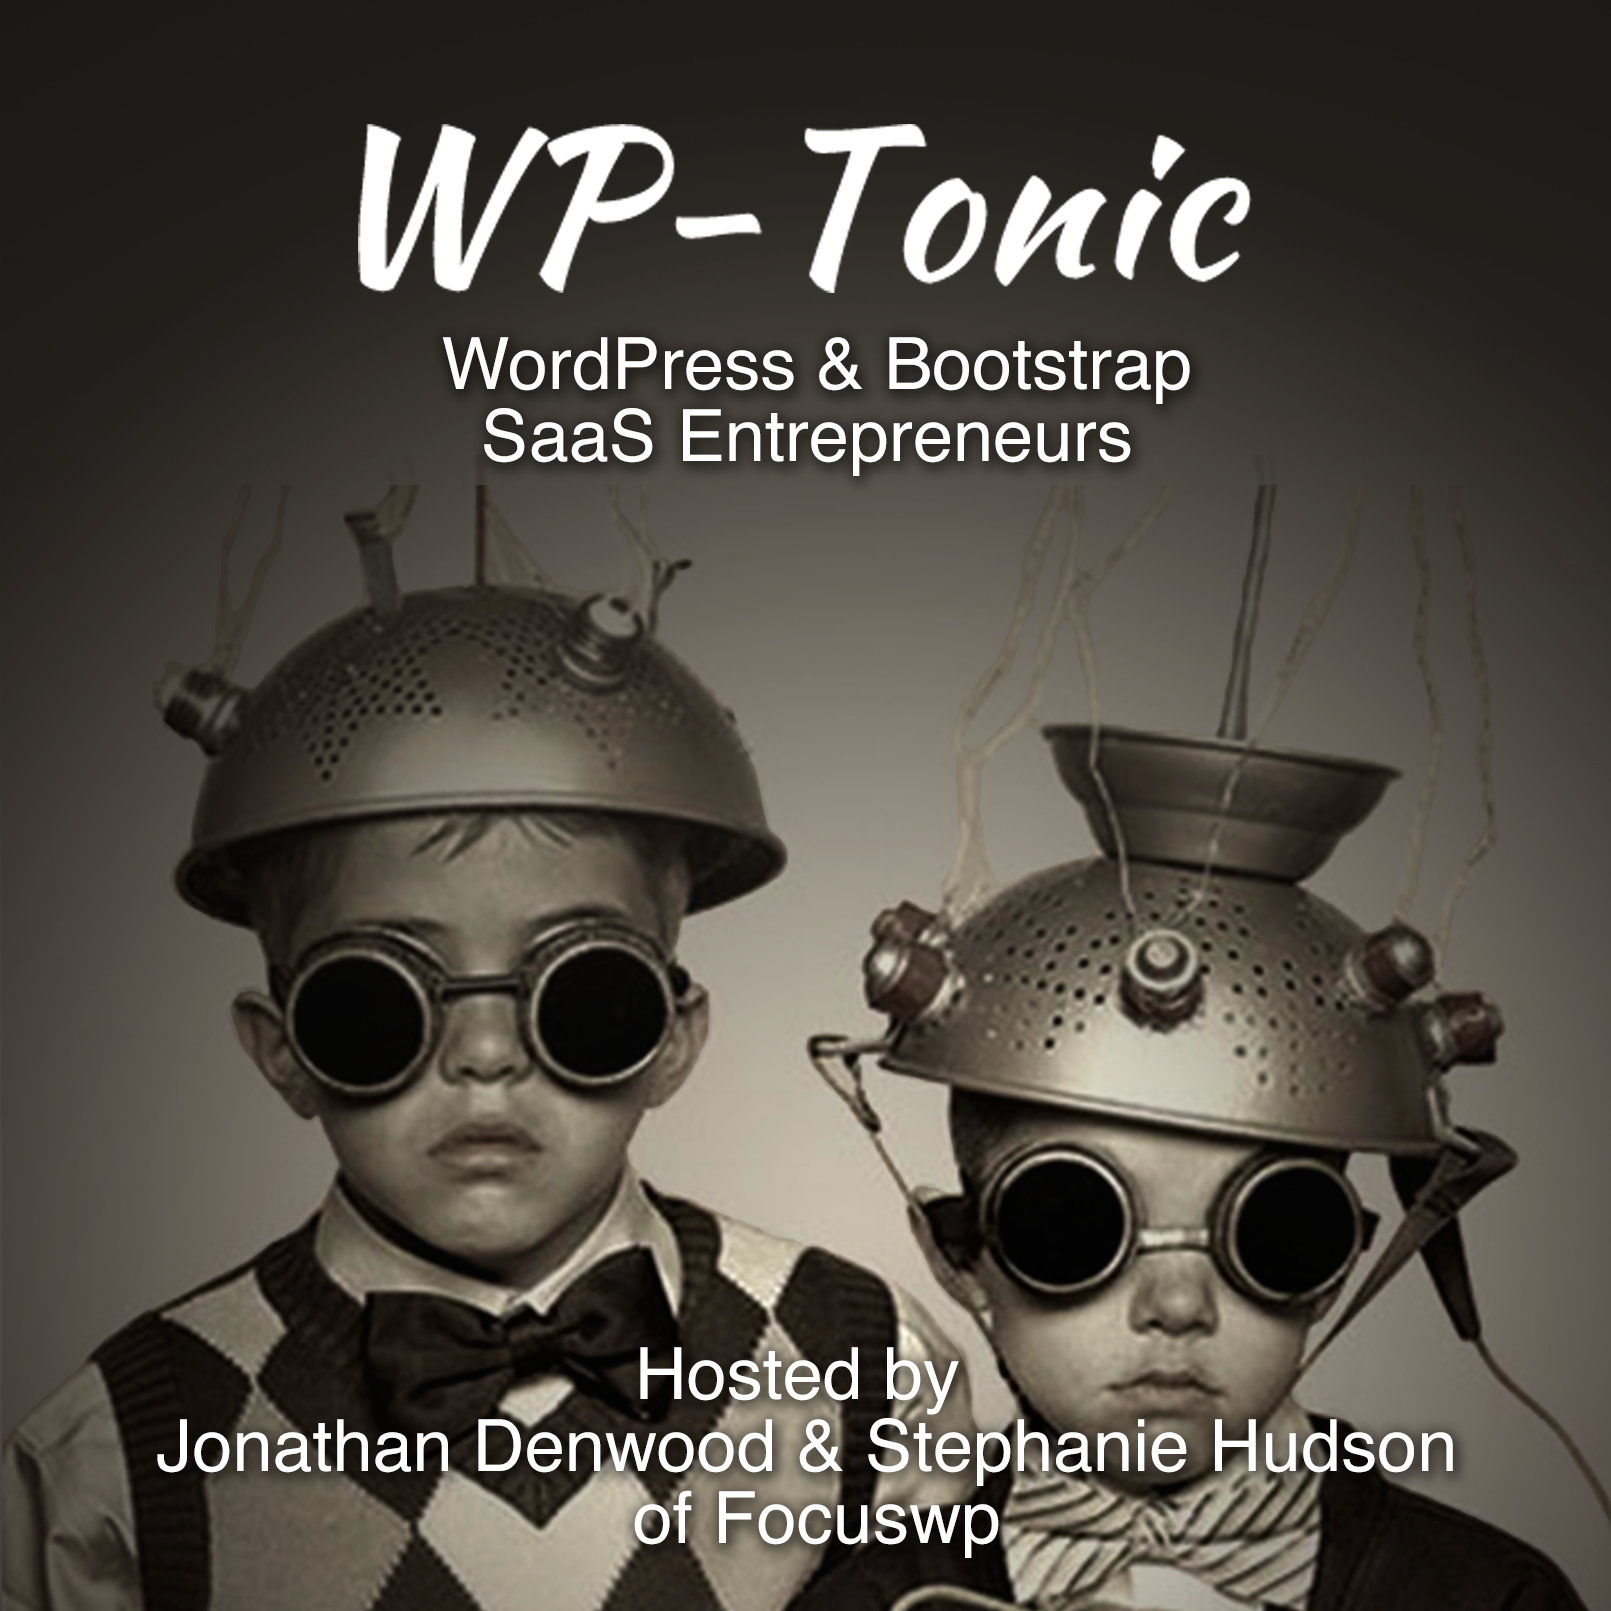 #588 WP-Tonic Round-Table Show on Friday, 23th of April, 2021 at 8:30 am PST